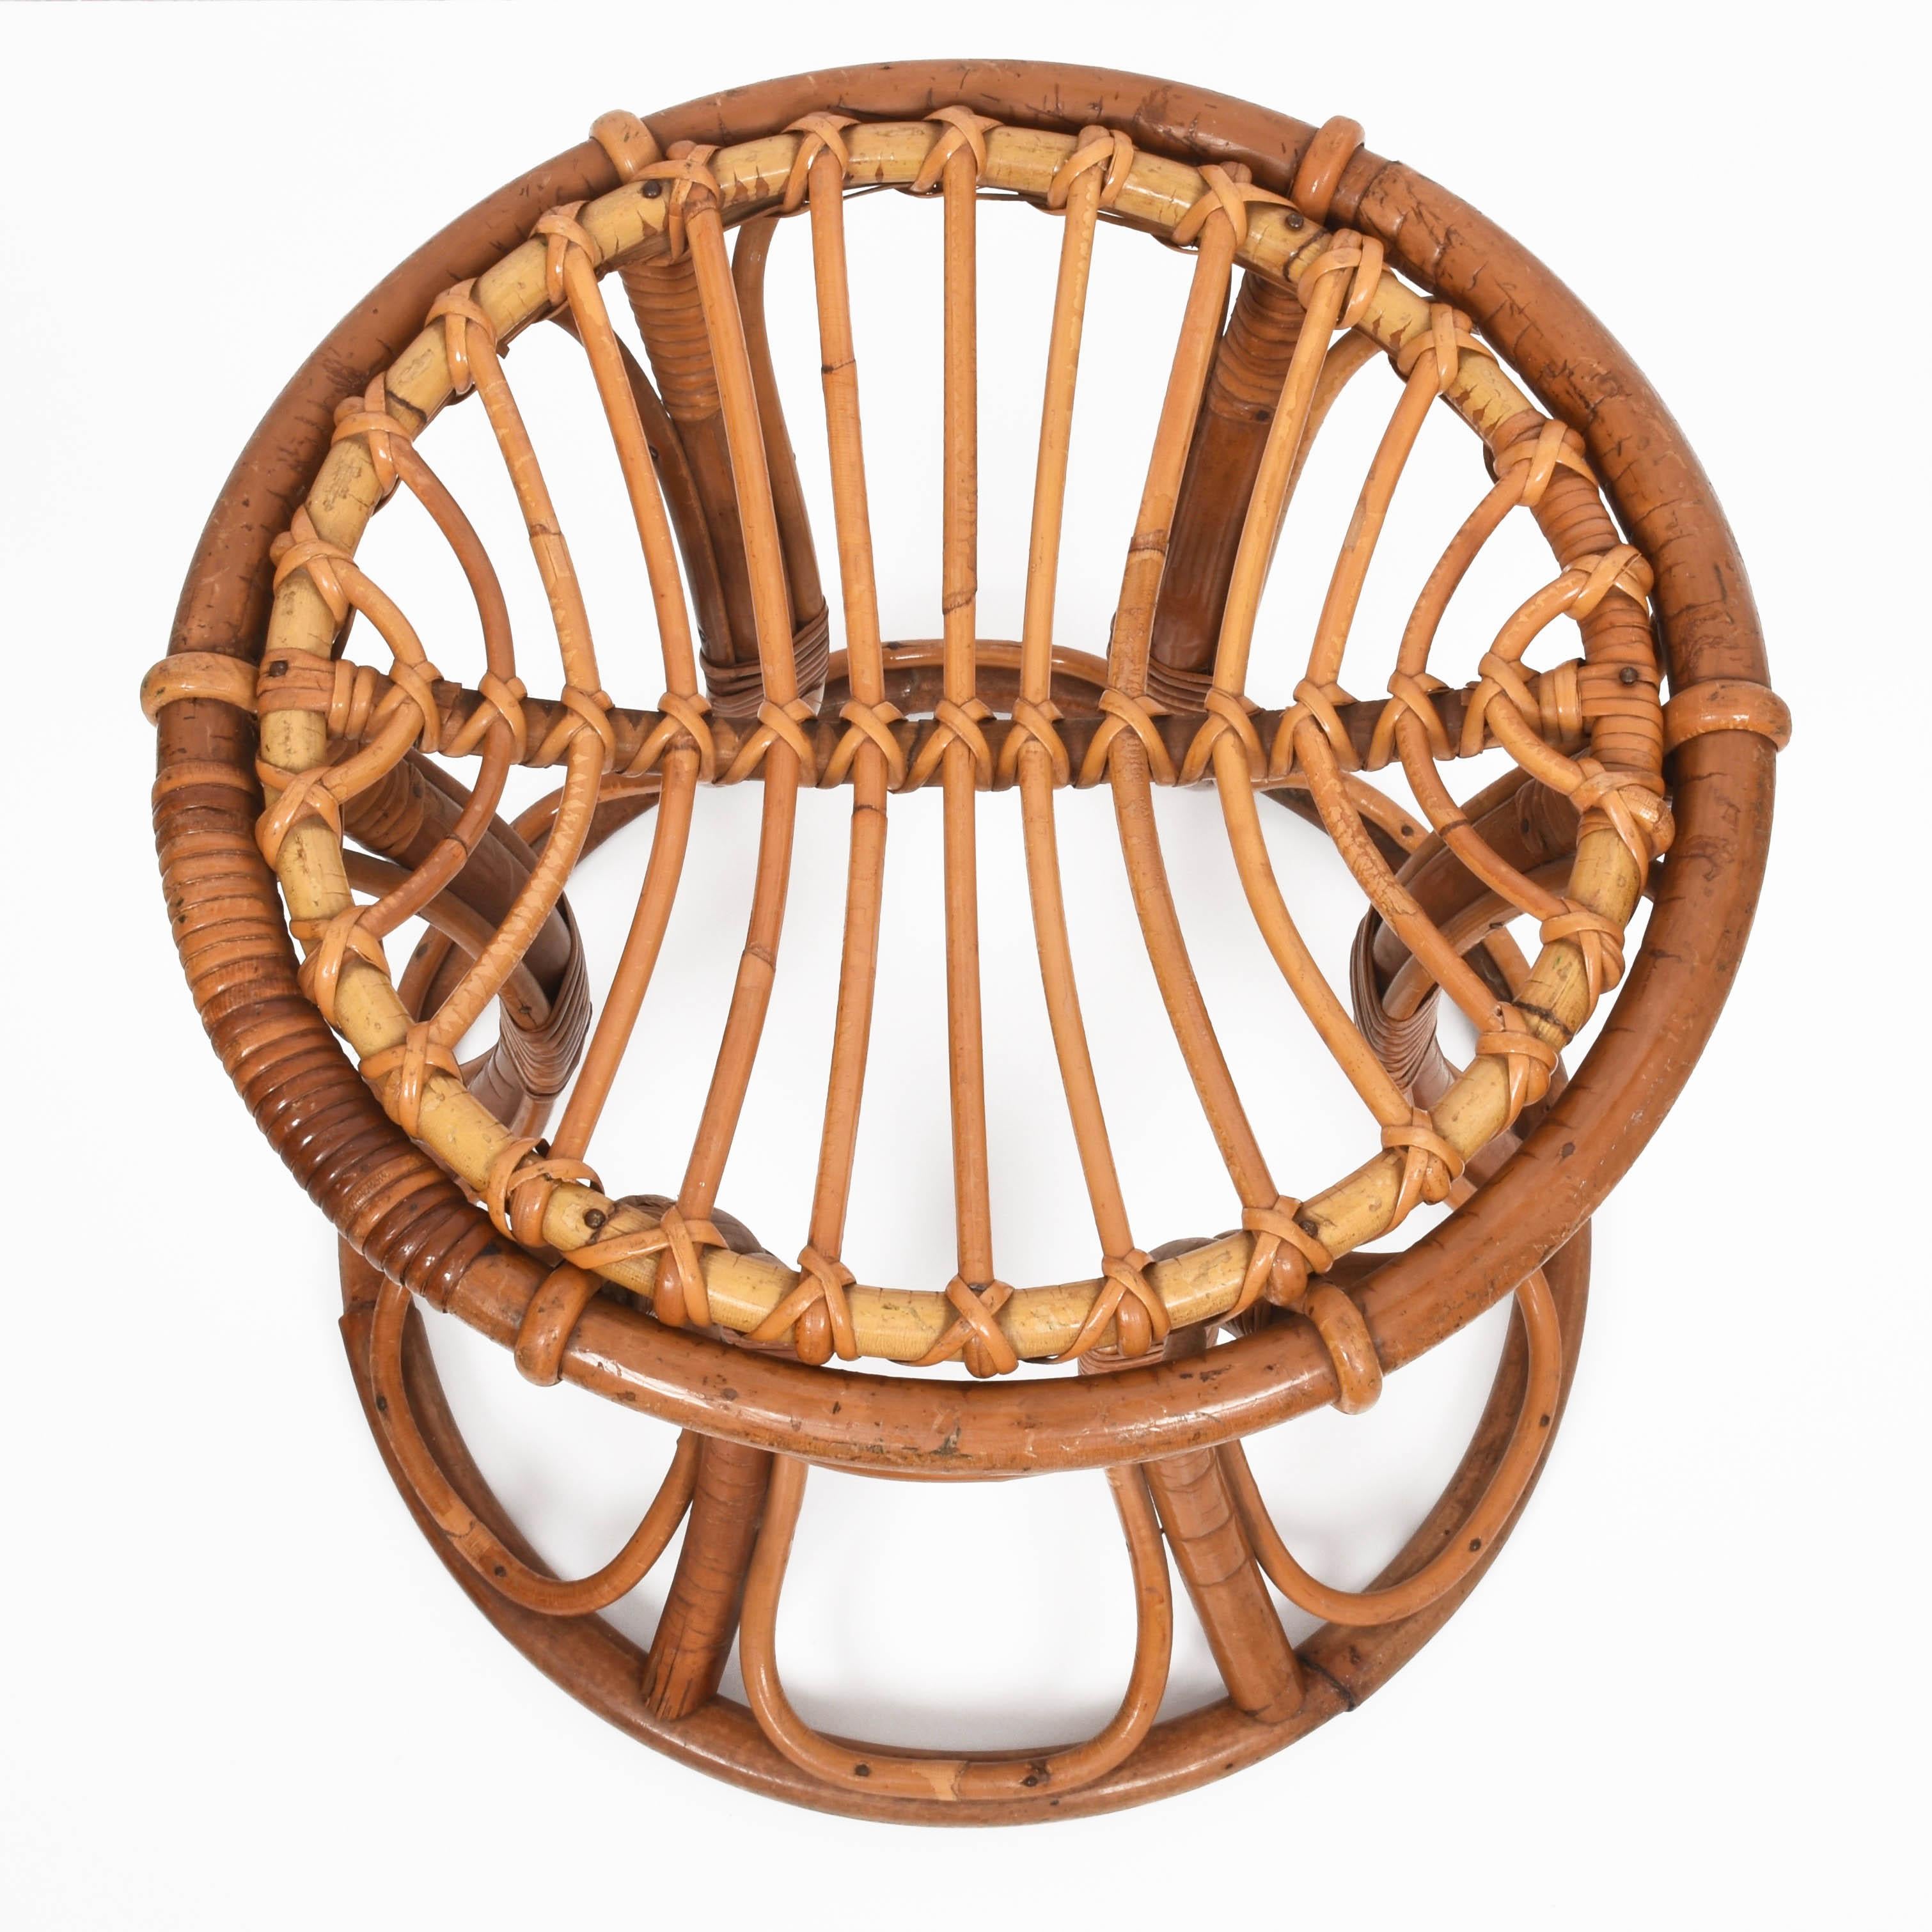 20th Century Mid-Century Modern Rattan and Bamboo Italian Round Stool, 1960s For Sale